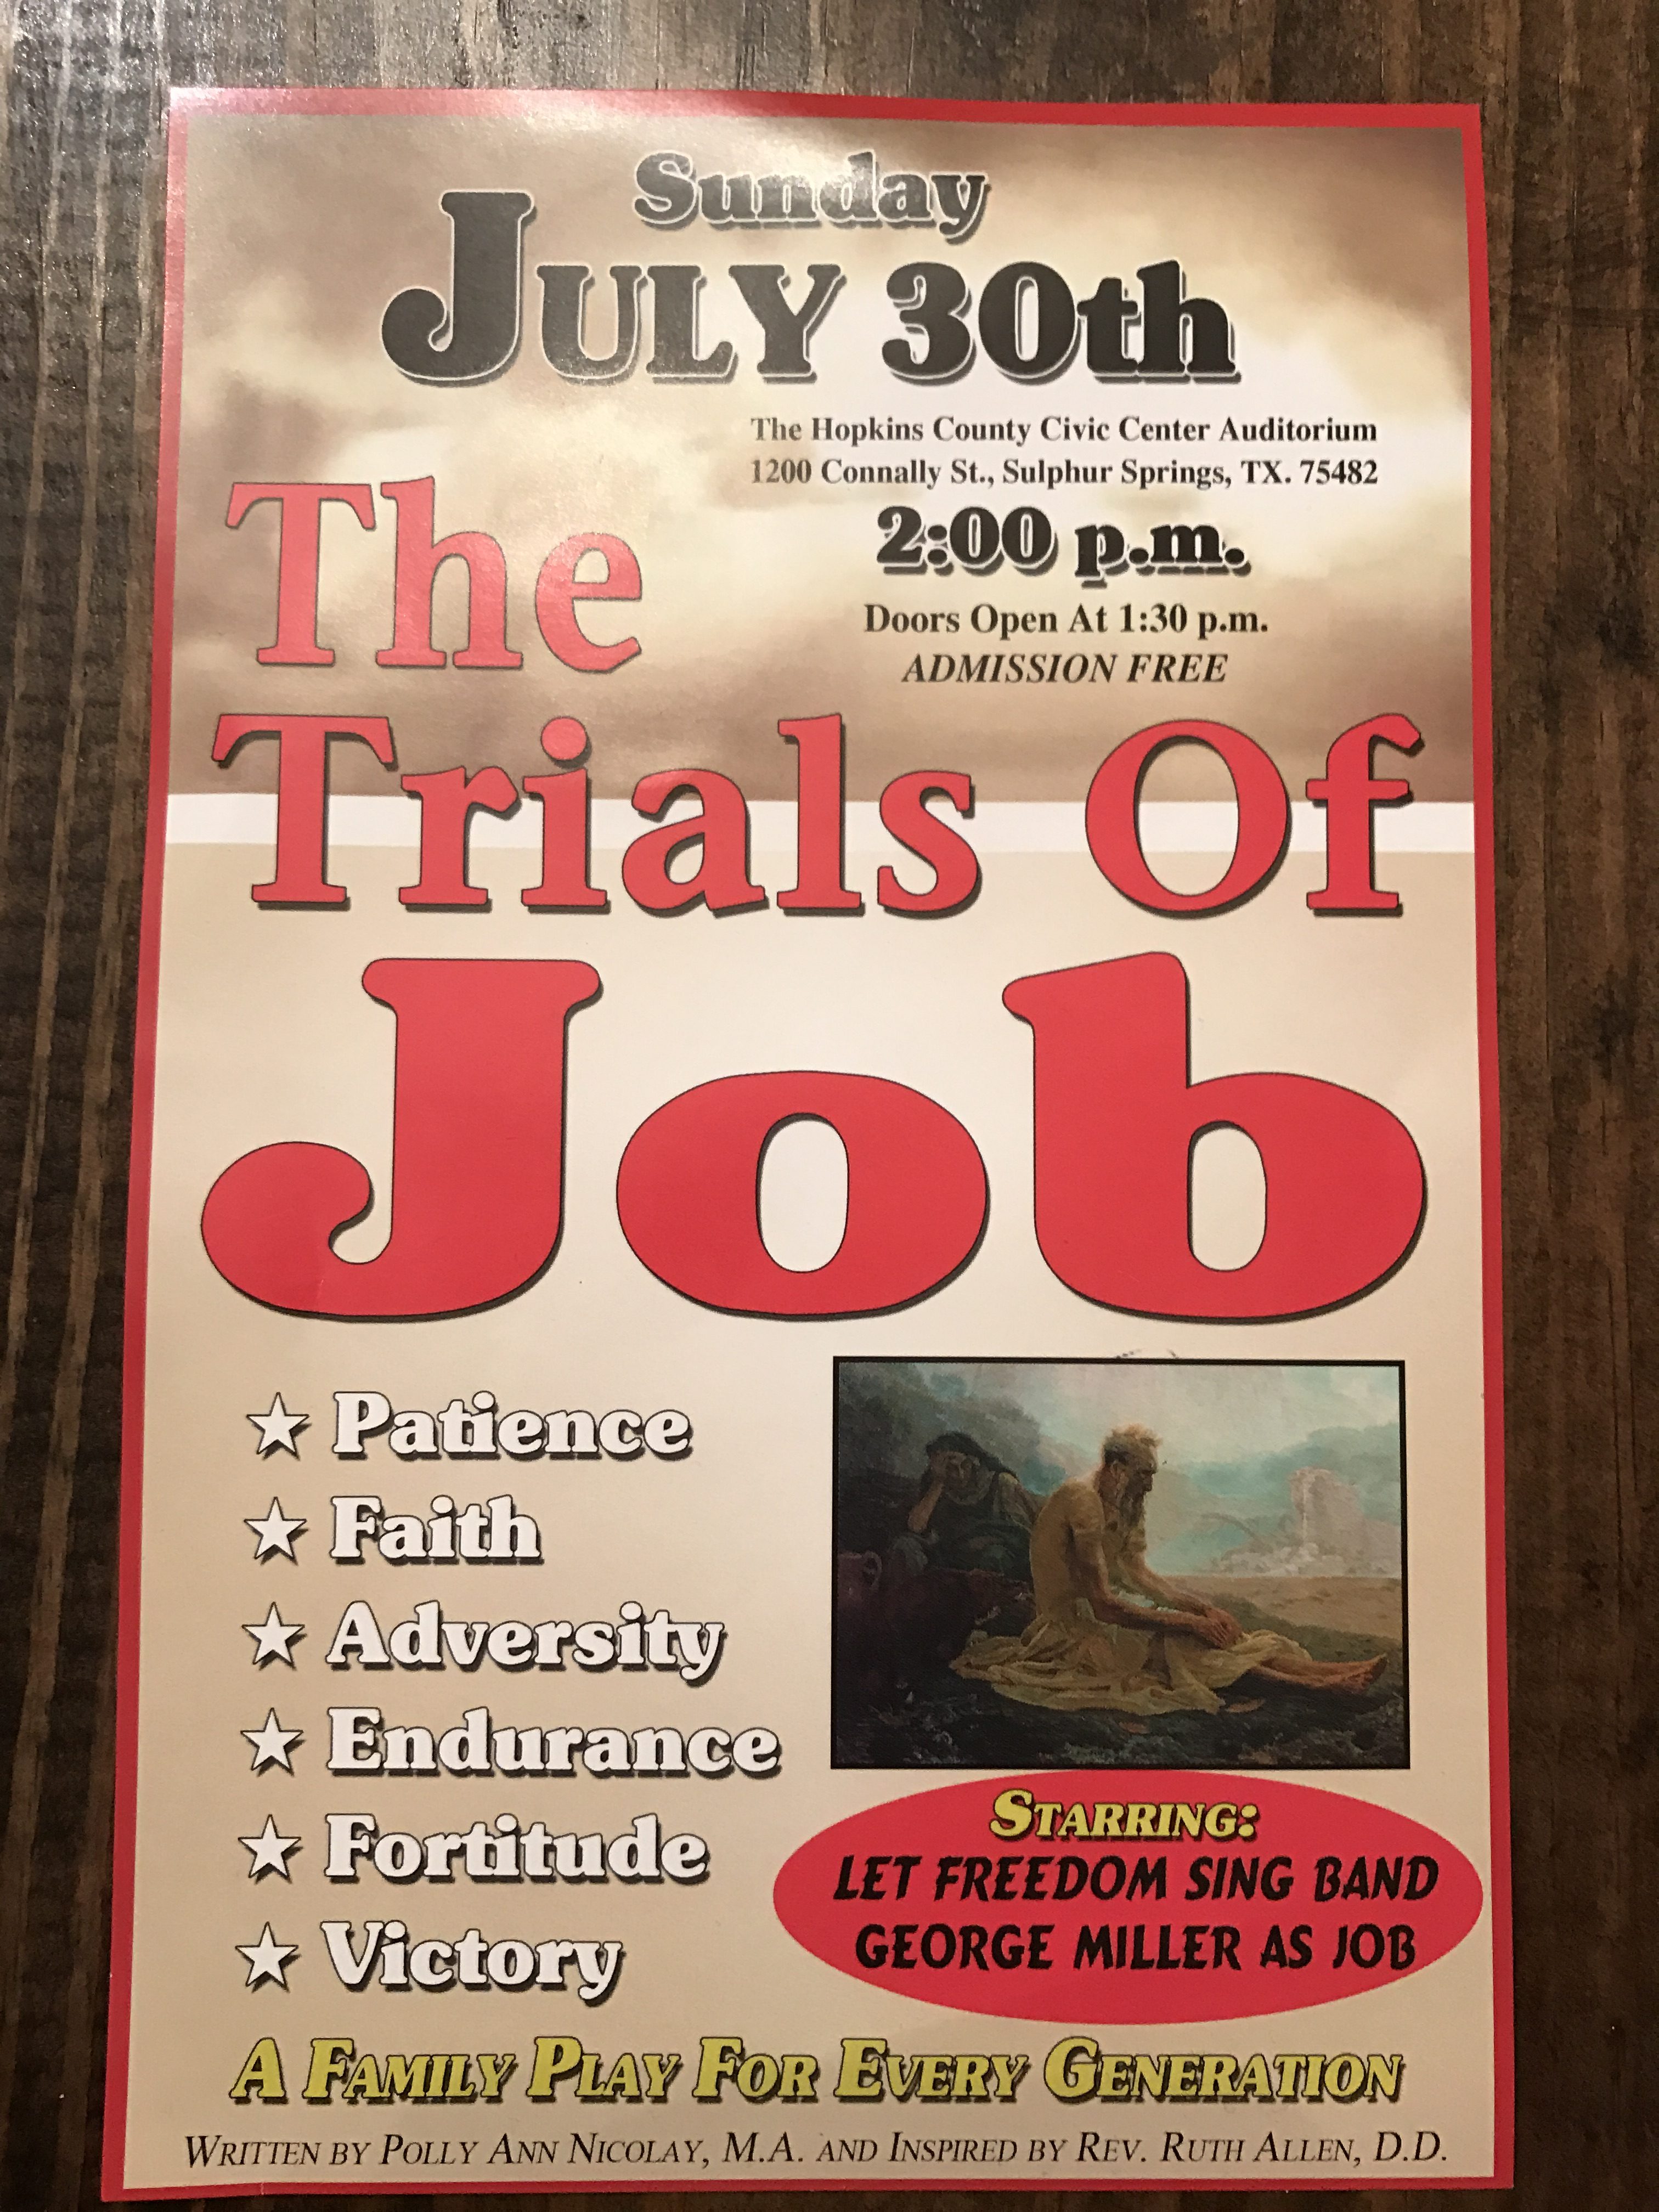 The Trials of Job Play Being Performed At Civic Center on Sunday